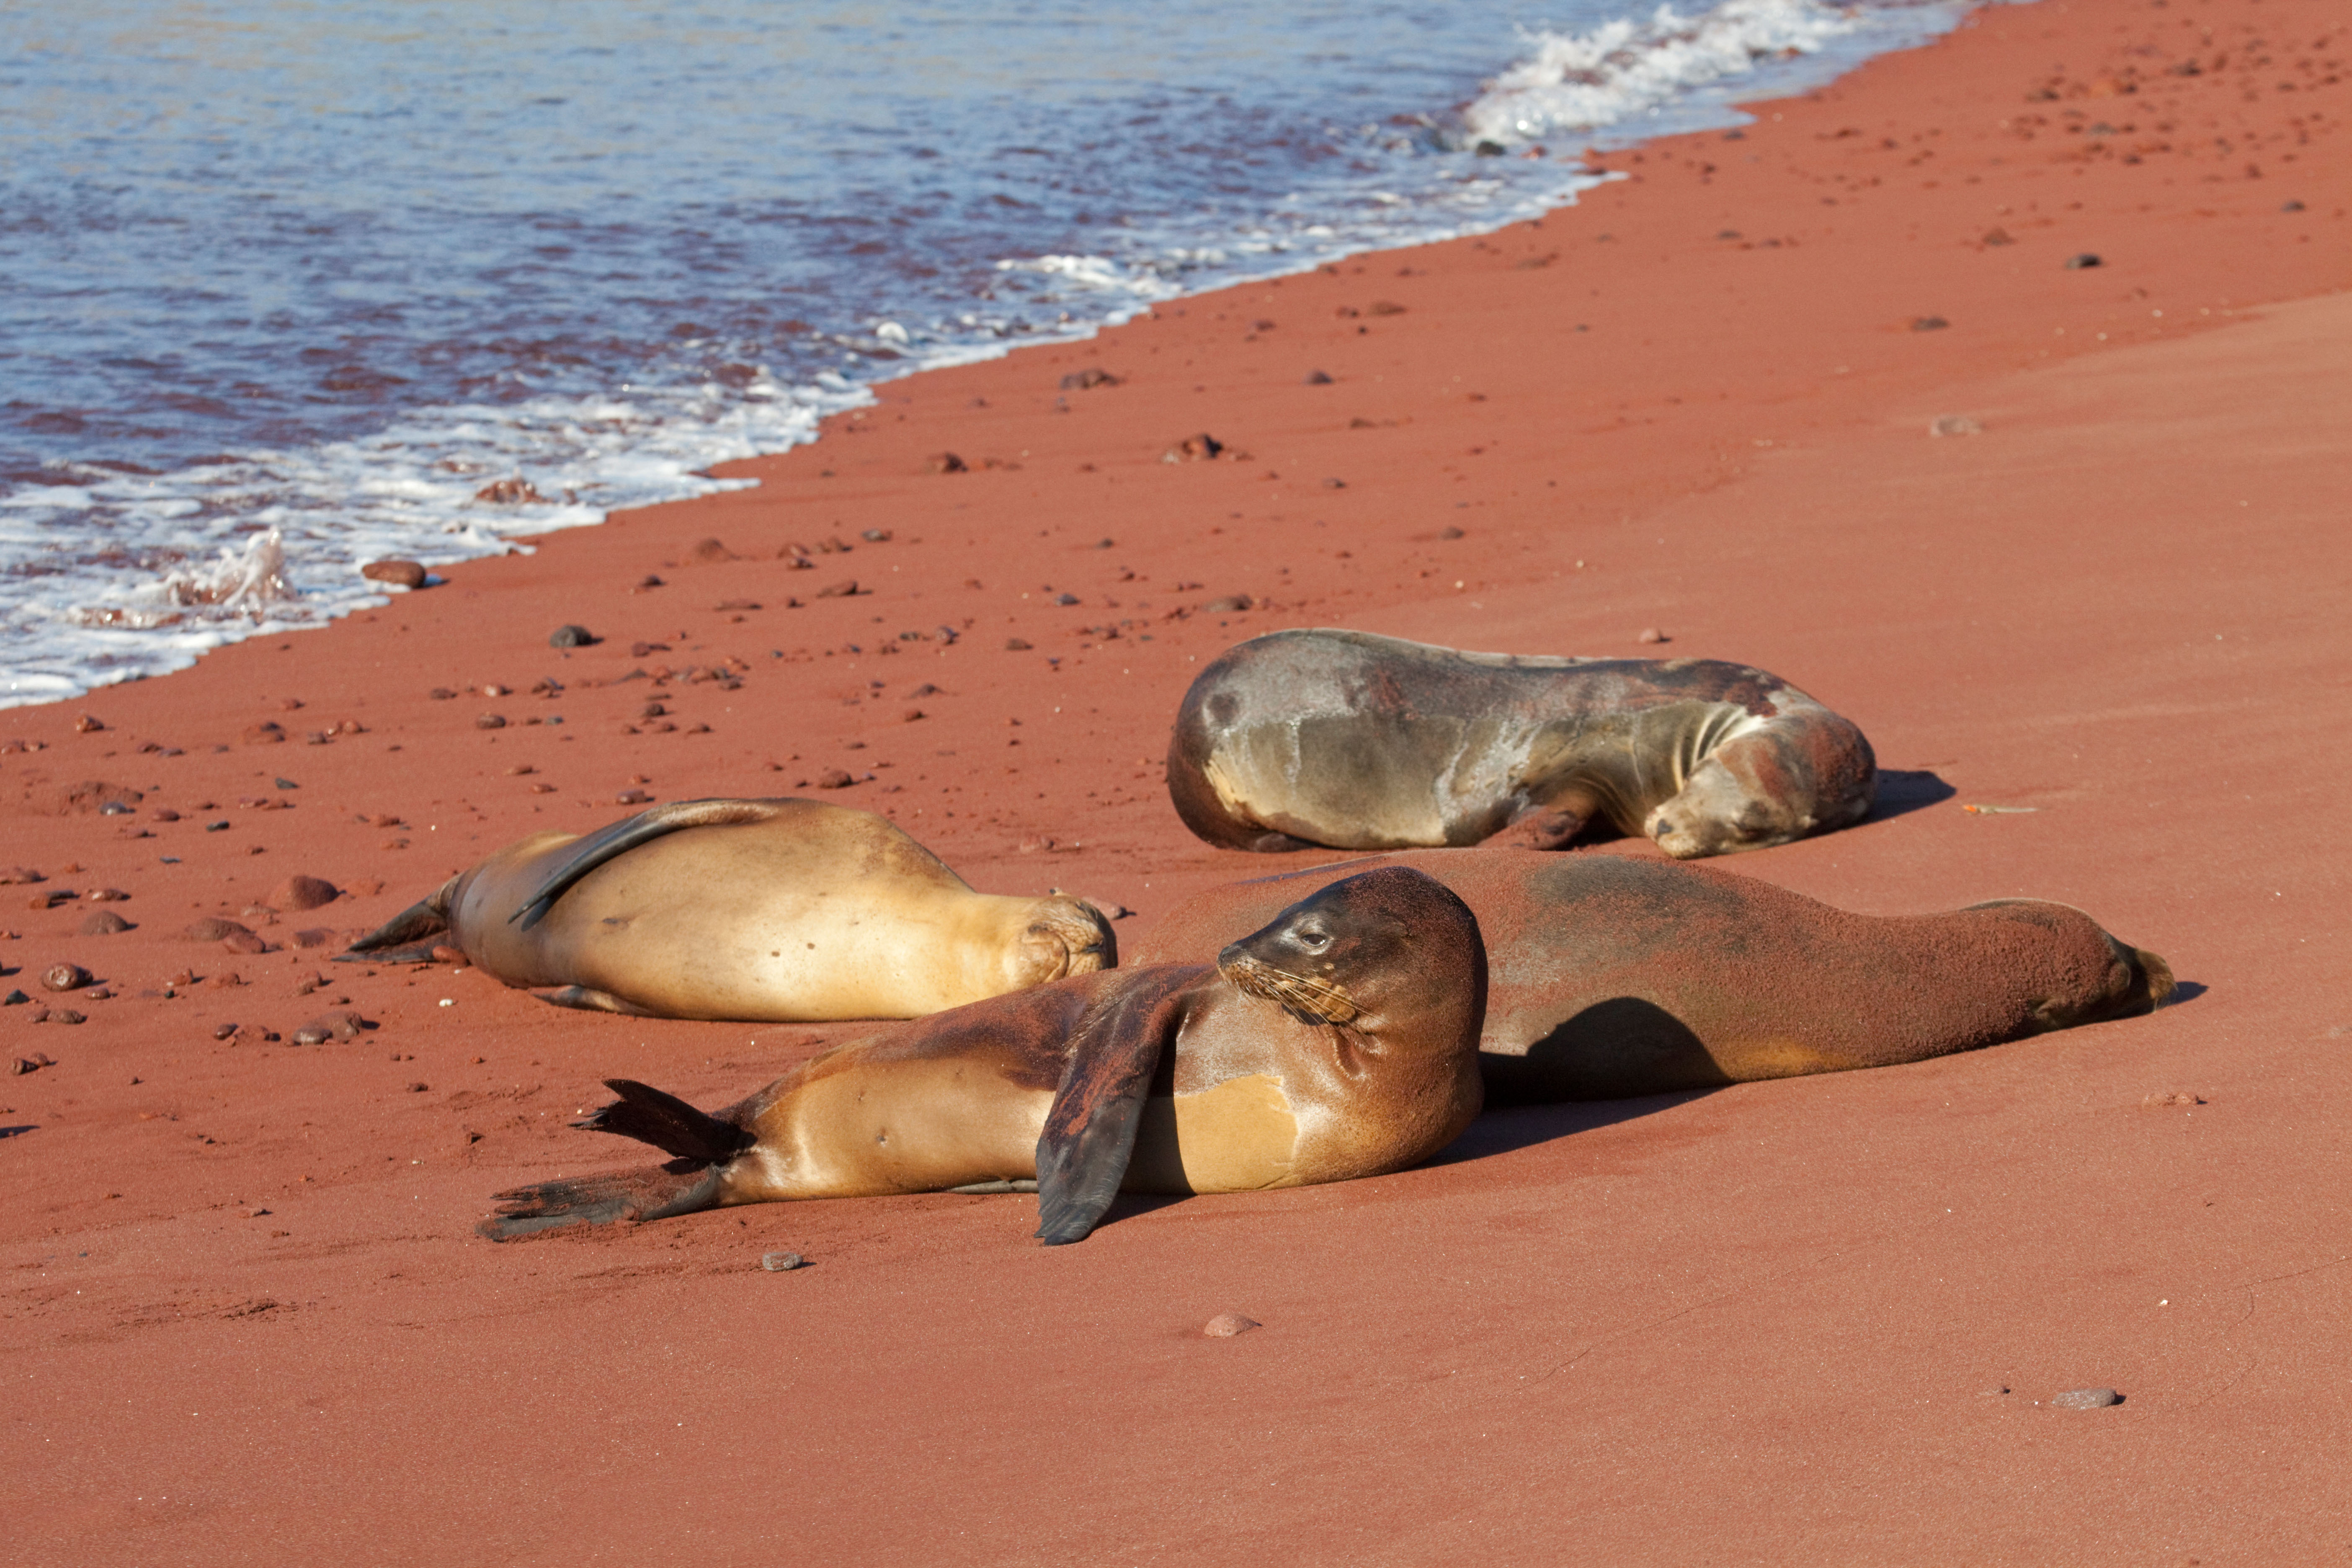 Rabida Island is also home to a colony of sea lions